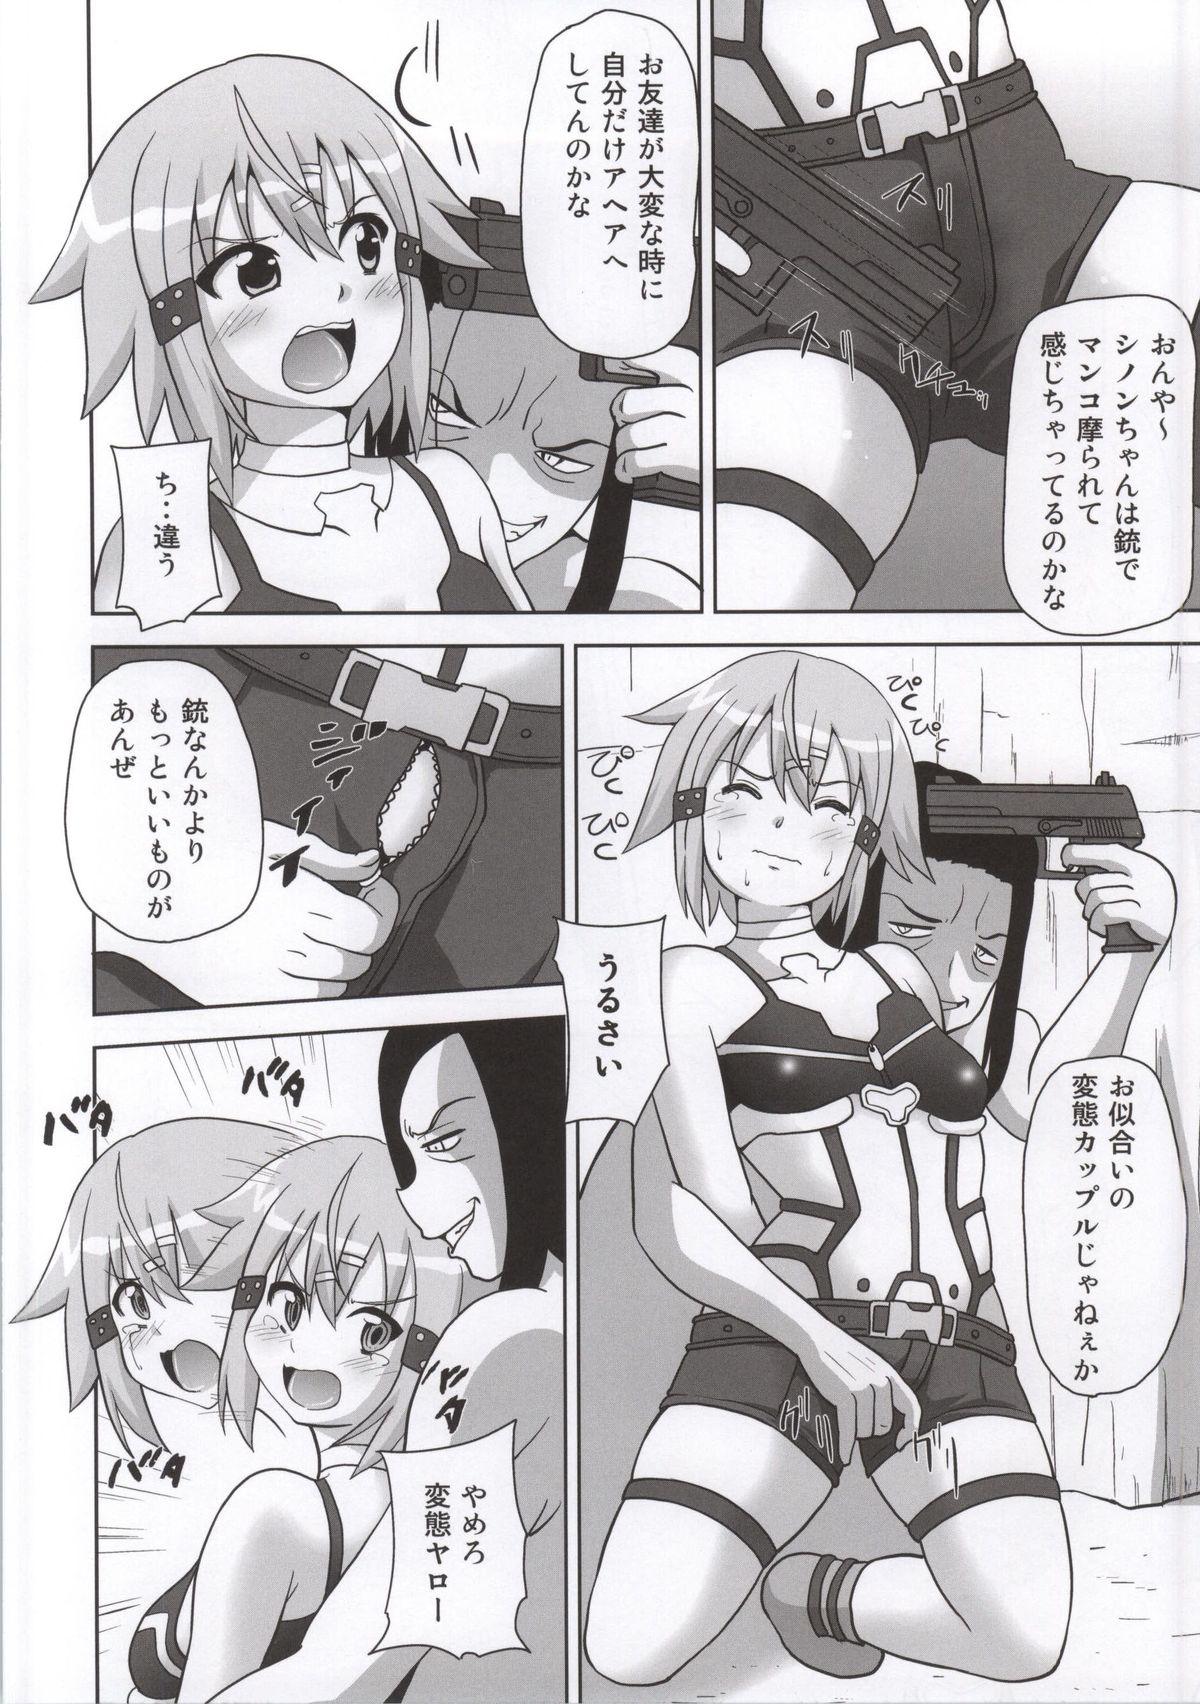 Buttfucking Haiboku Heroines - Sword art online Shavedpussy - Page 5